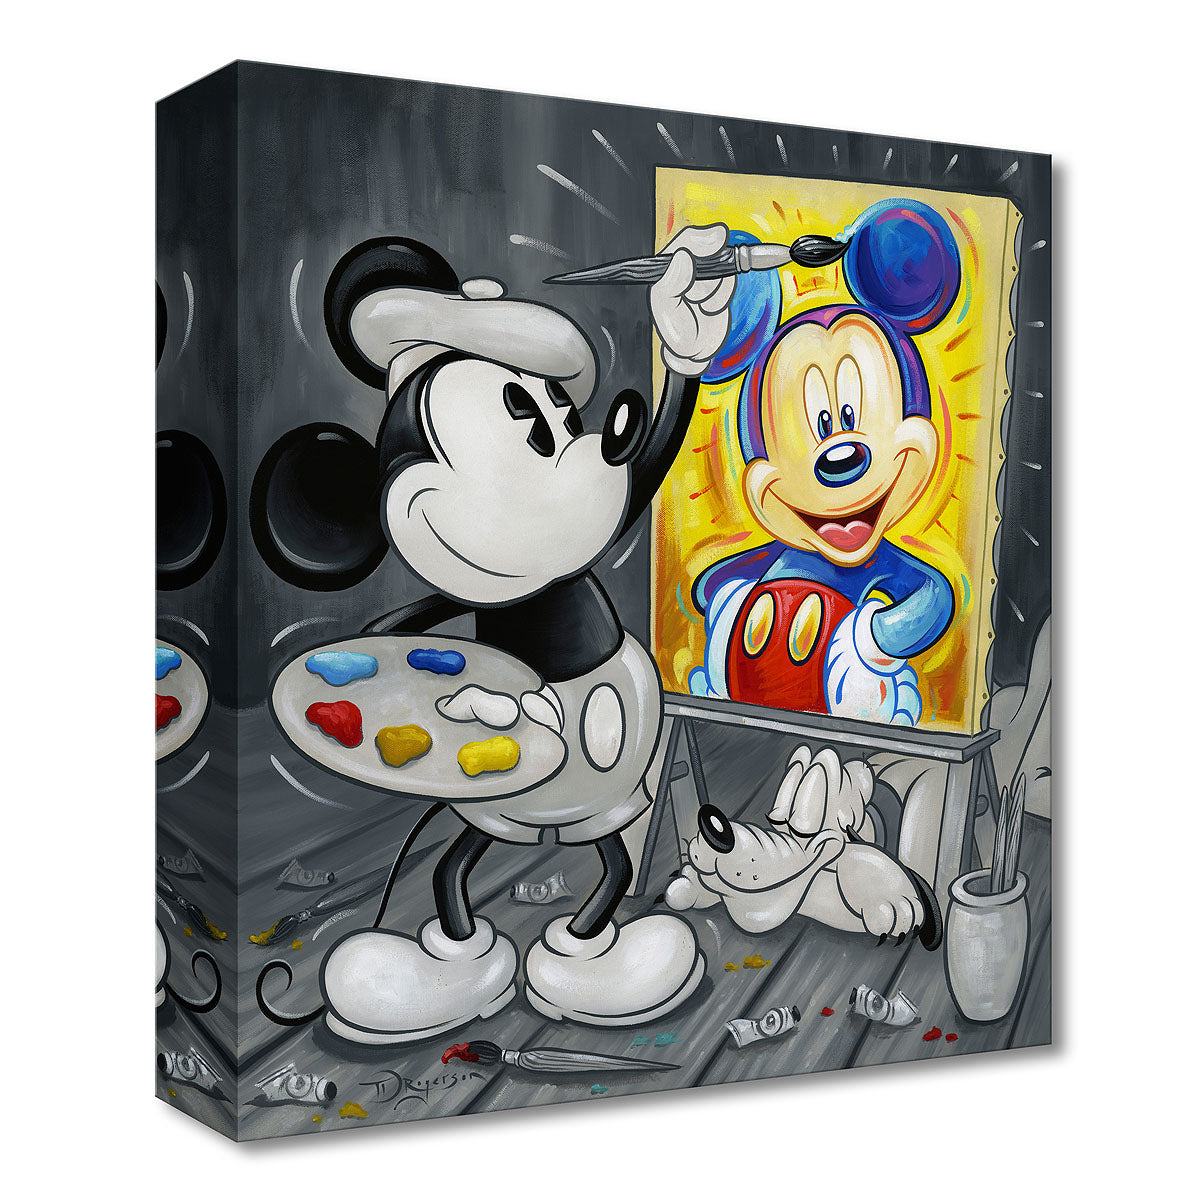 Mickey Paints Micjey by Tim Rogerson  Mickey painting a self-portrait, with his best friend Pluto at his feet taking a nap.